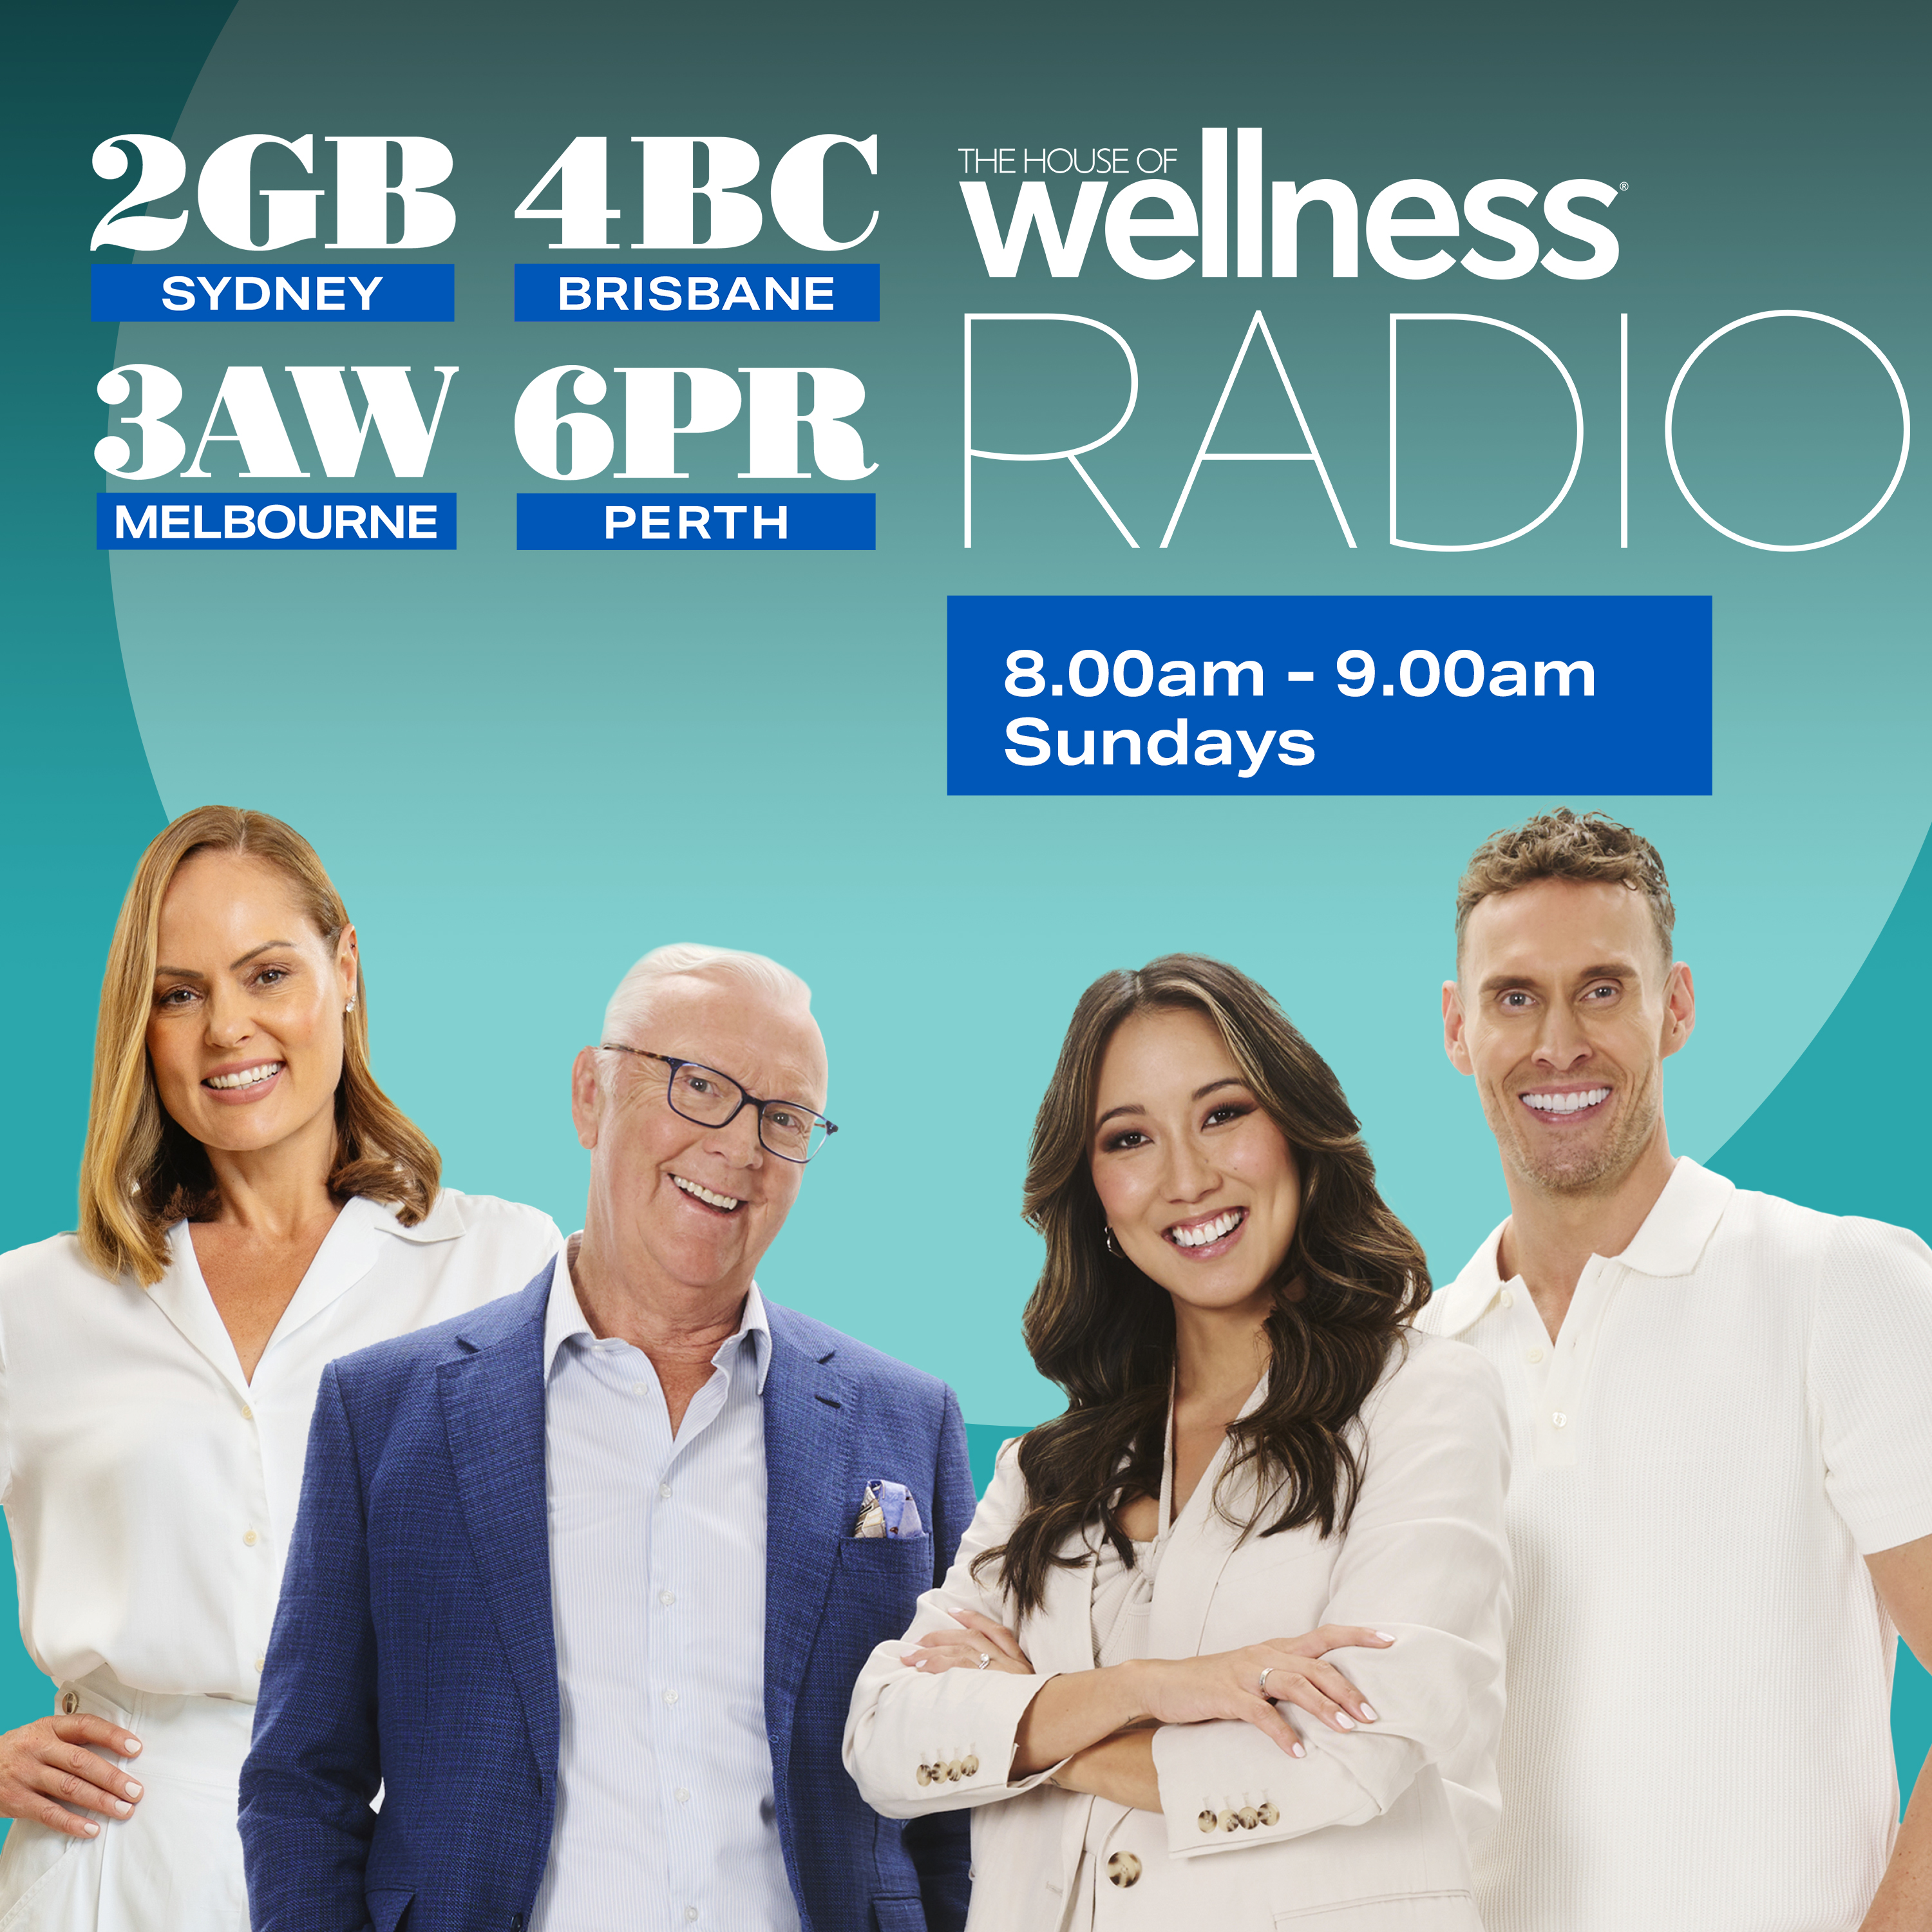 Broadcaster Gus Worland joins the House of Wellness